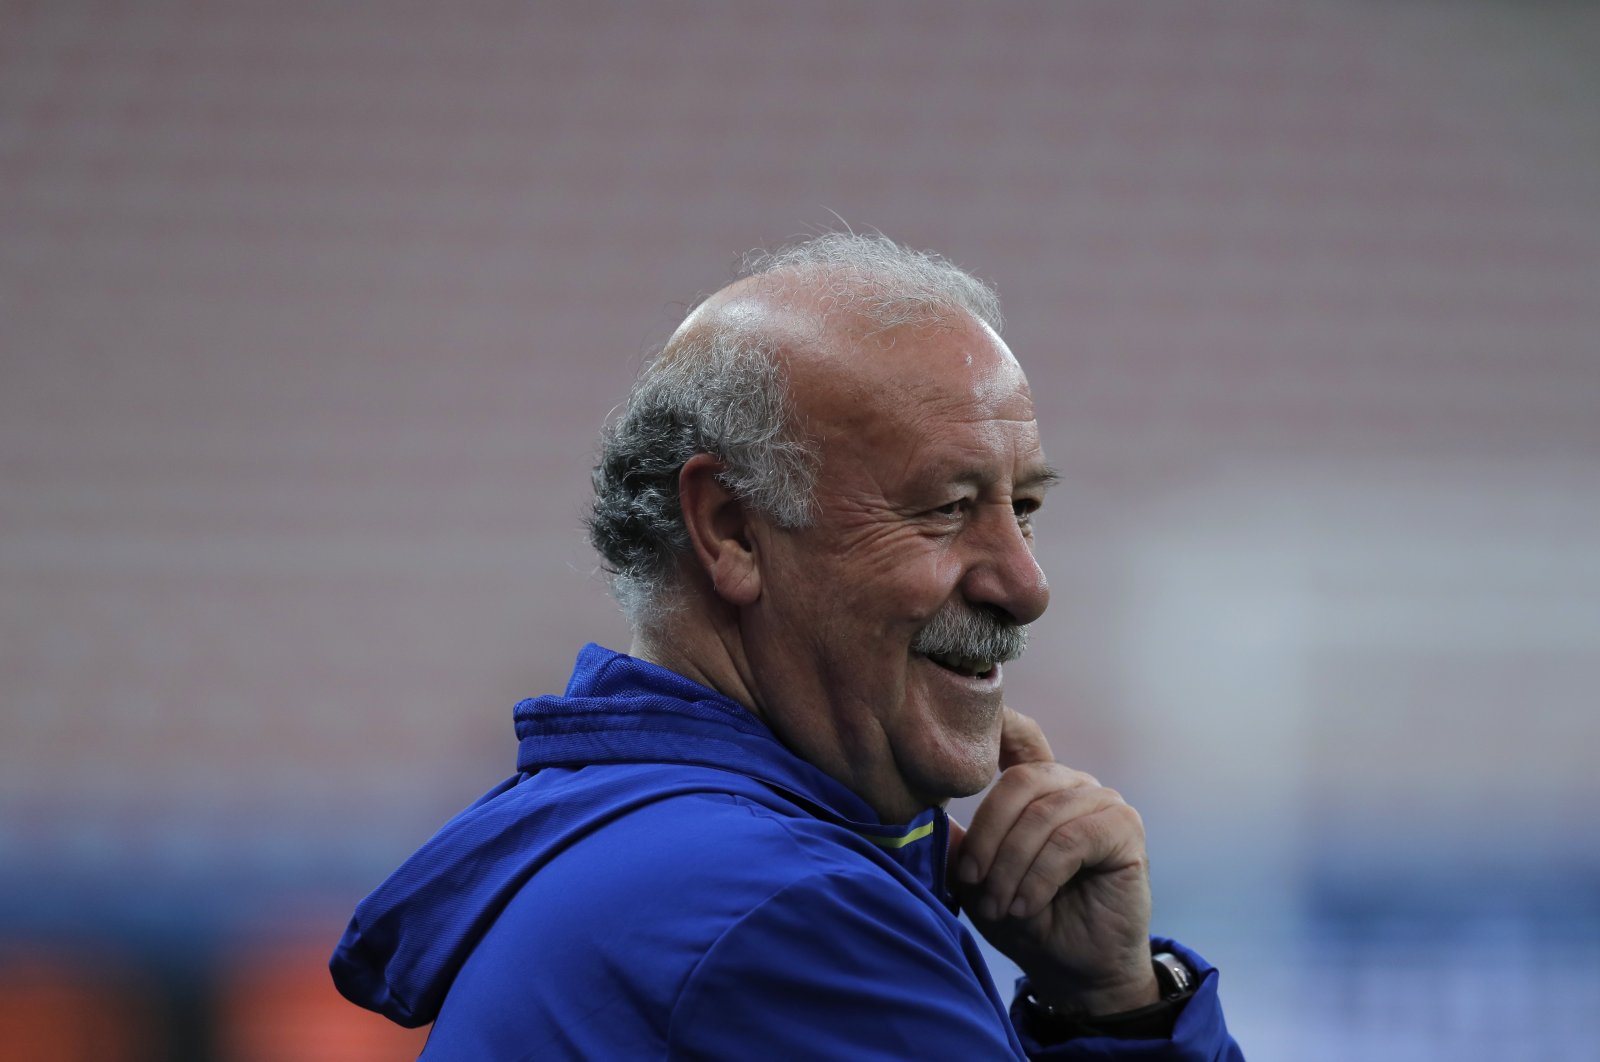 Former Spain coach Vicente del Bosque smiles during a training session at the Allianz Riviera stadium, Nice, France, June 16, 2016. (AP Photo)